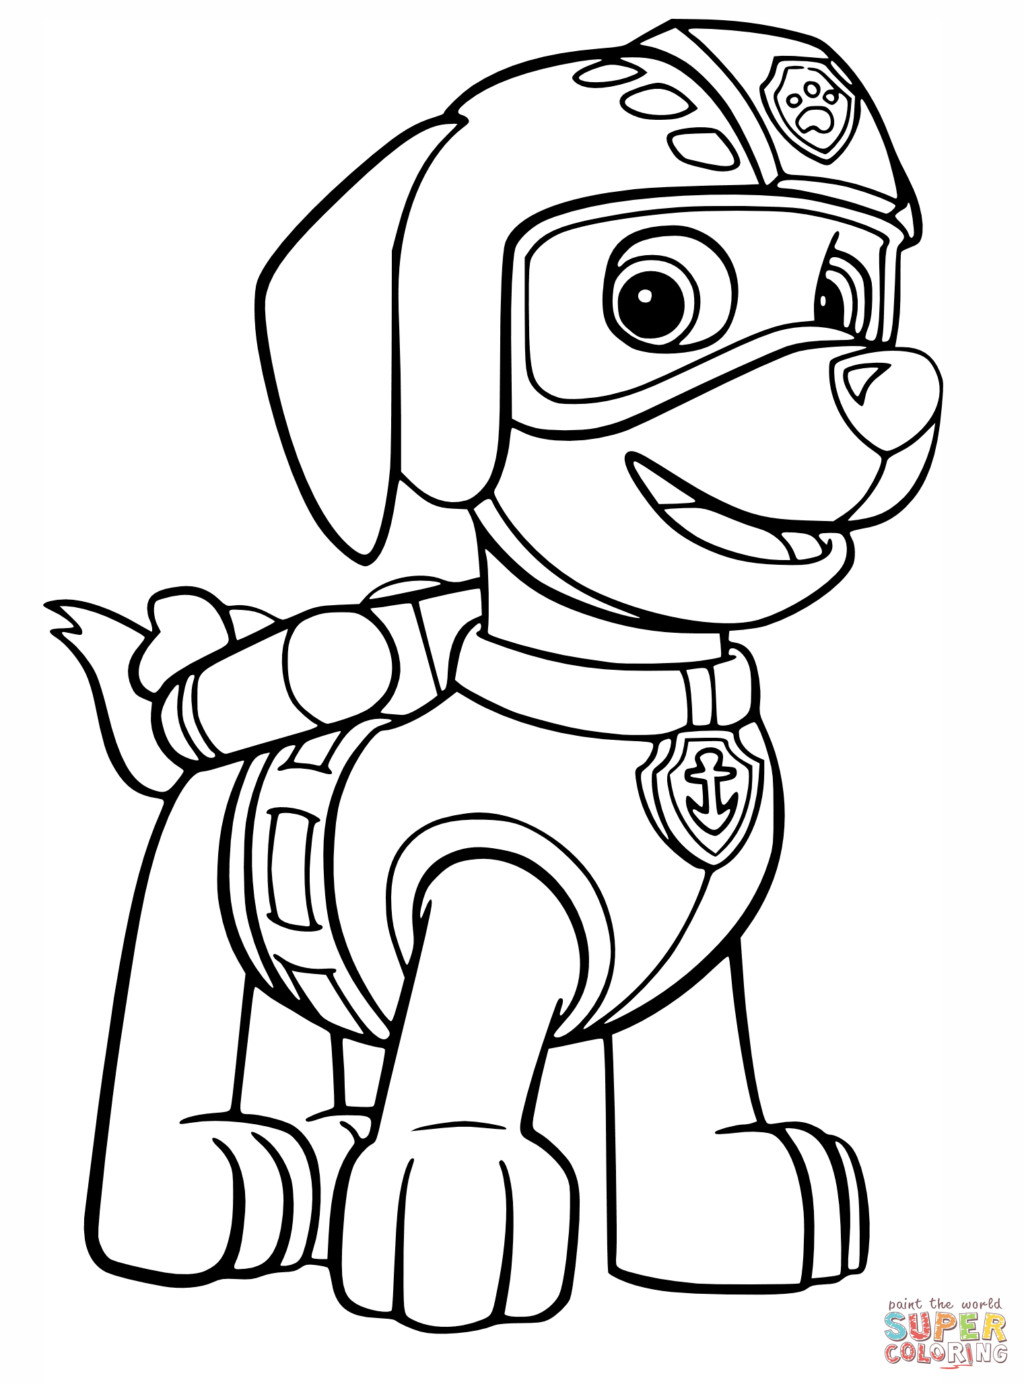 Free Paw Patrol Coloring Pages
 Paw Patrol Free Colouring Pages